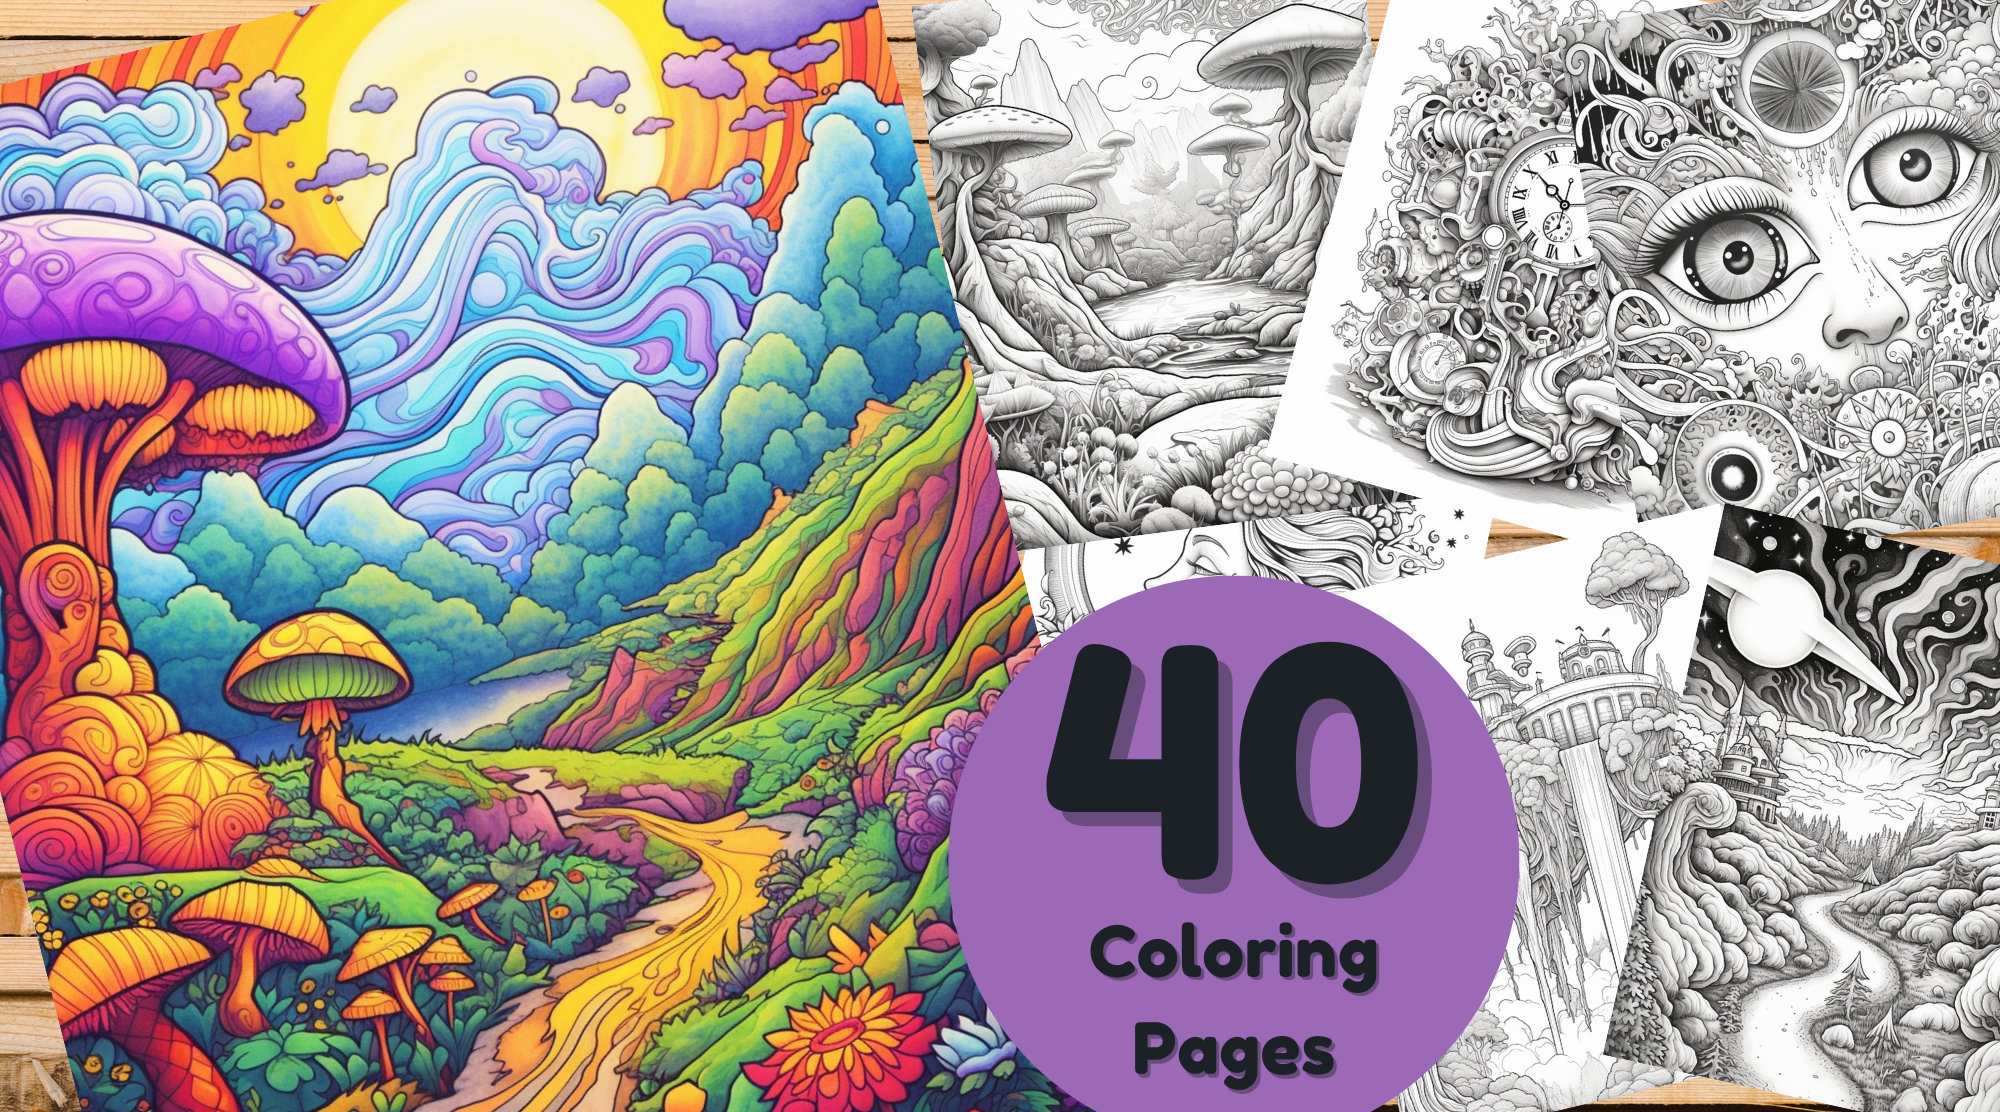 Stoner Coloring Book for Adults: Cool Stoner Psychedelic Coloring